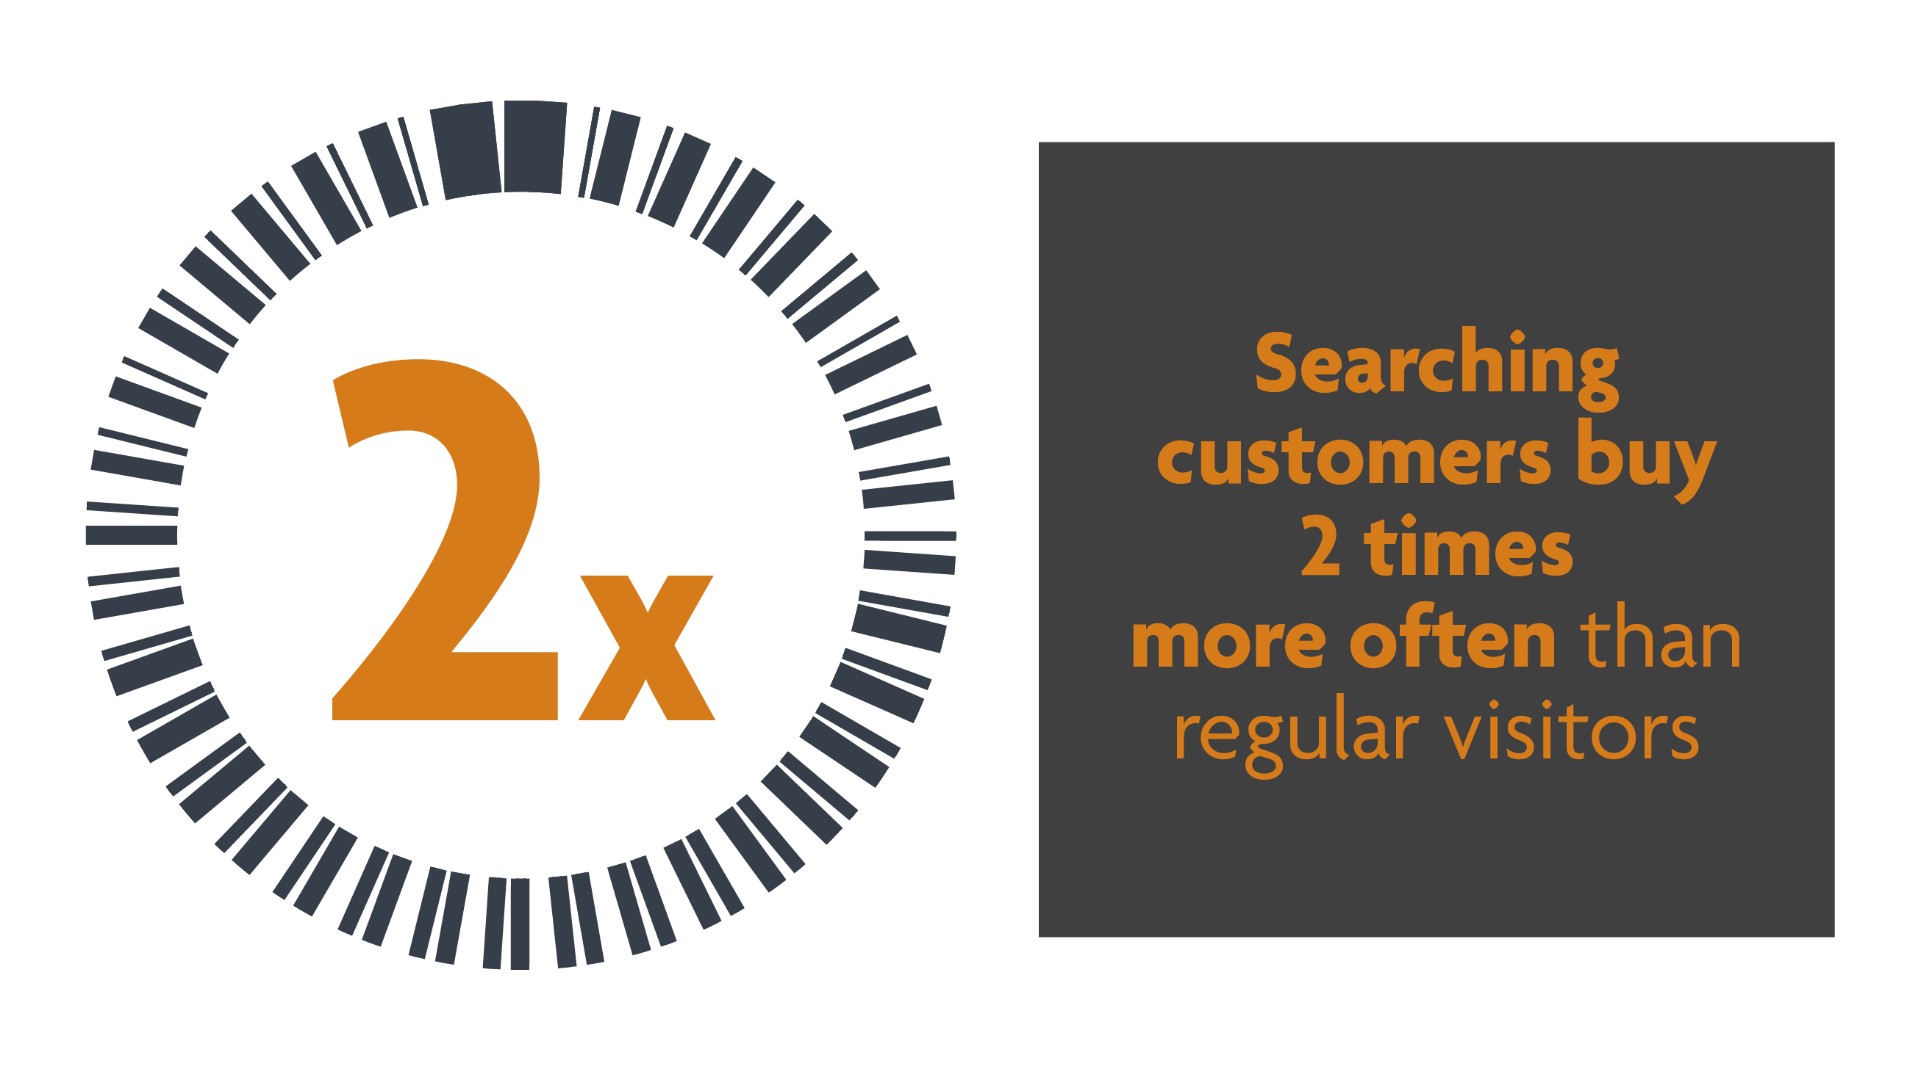 Searching customers buy 2 times more often than regular visitors